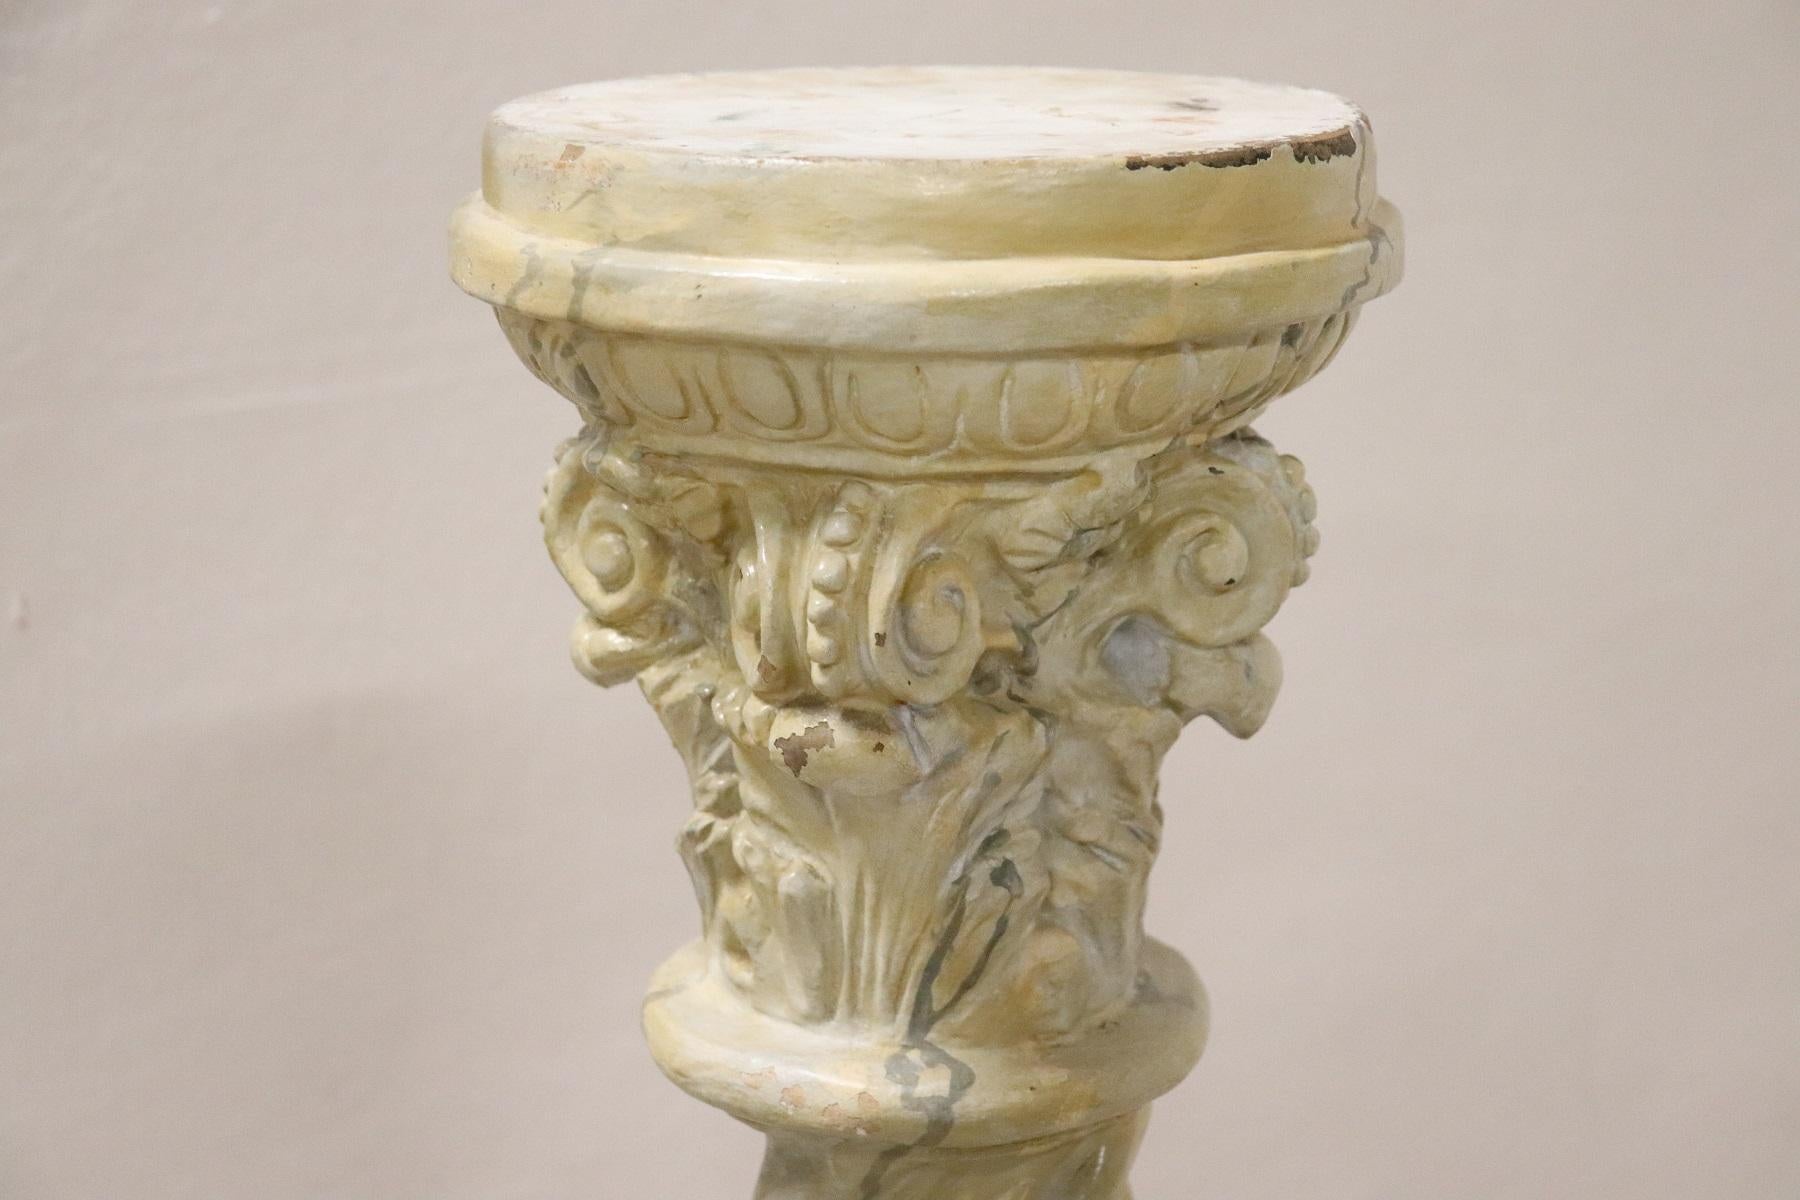 Beautiful Italian carved and painted terracotta column, 1880s. This column is truly fascinating. Note the details, beautiful capital with acanthus leaves. Entirely in sculpted terracotta, beautiful turned column. Painted with the veins of the